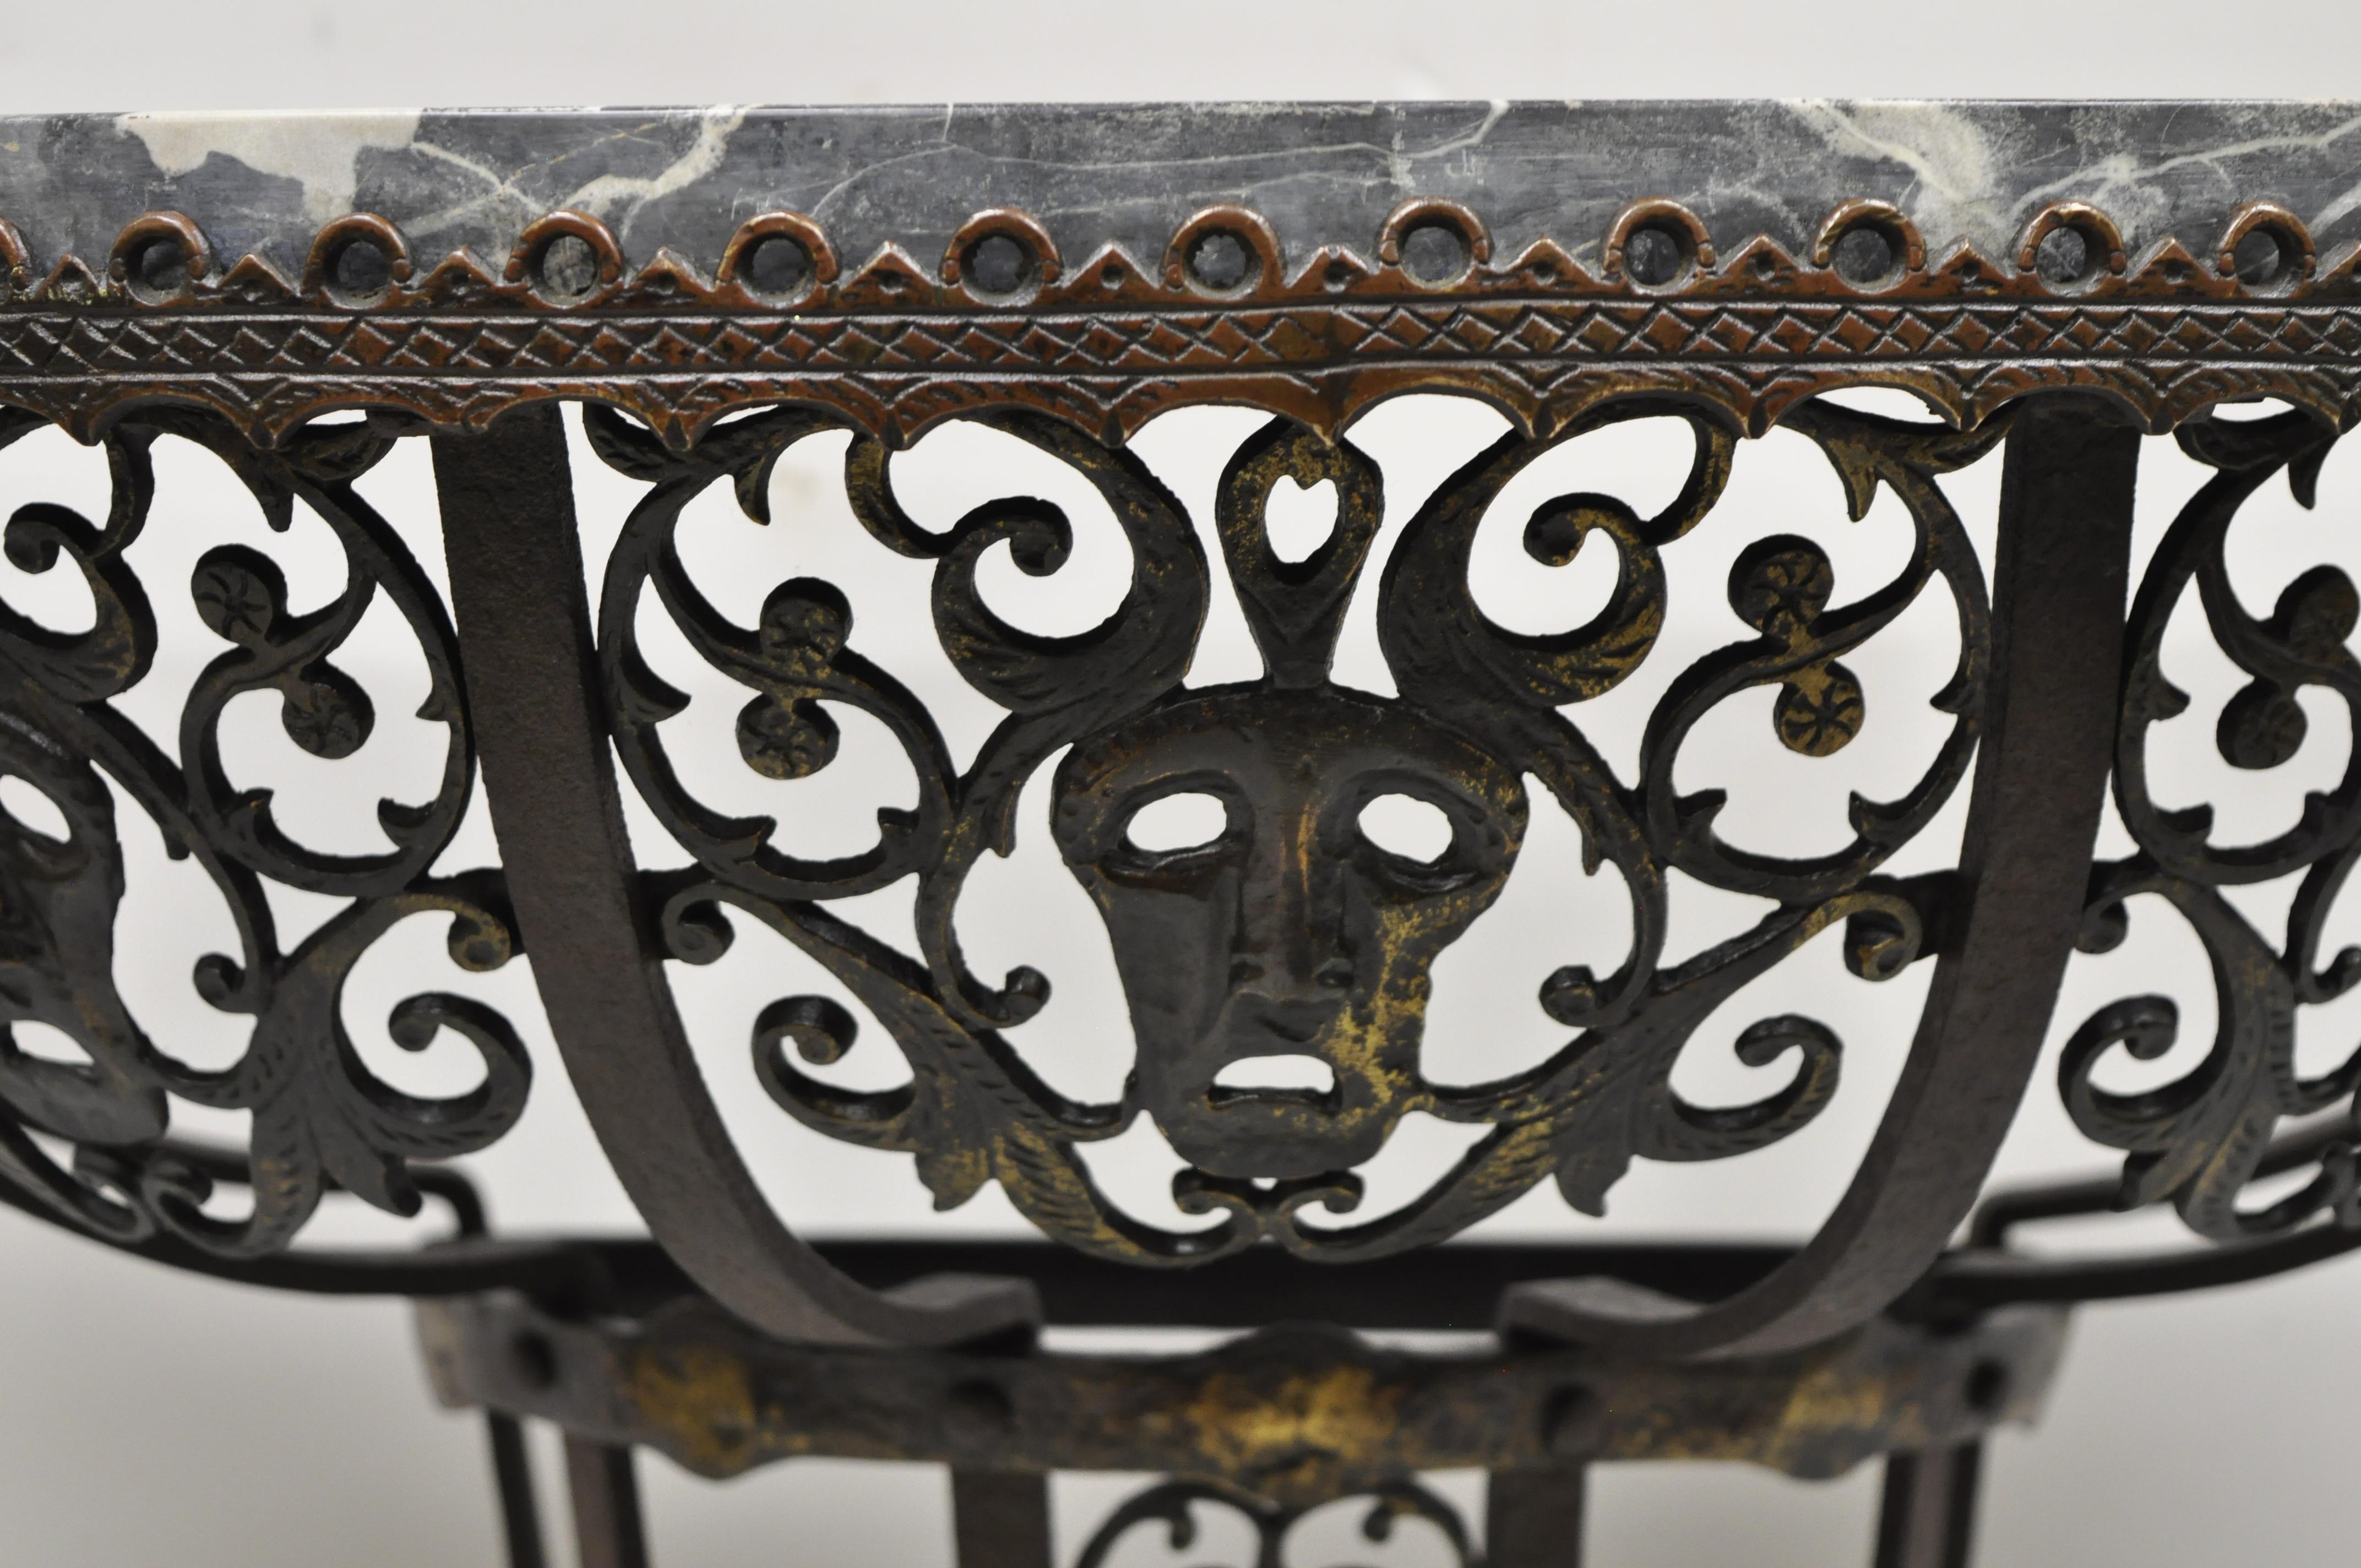 Antique French Art Nouveau wrought iron figural half round demilune marble top console hall table with faces after oscar bach. Item features half round marble top, pierce decorated faces to skirt, wrought iron construction, very nice antique item,